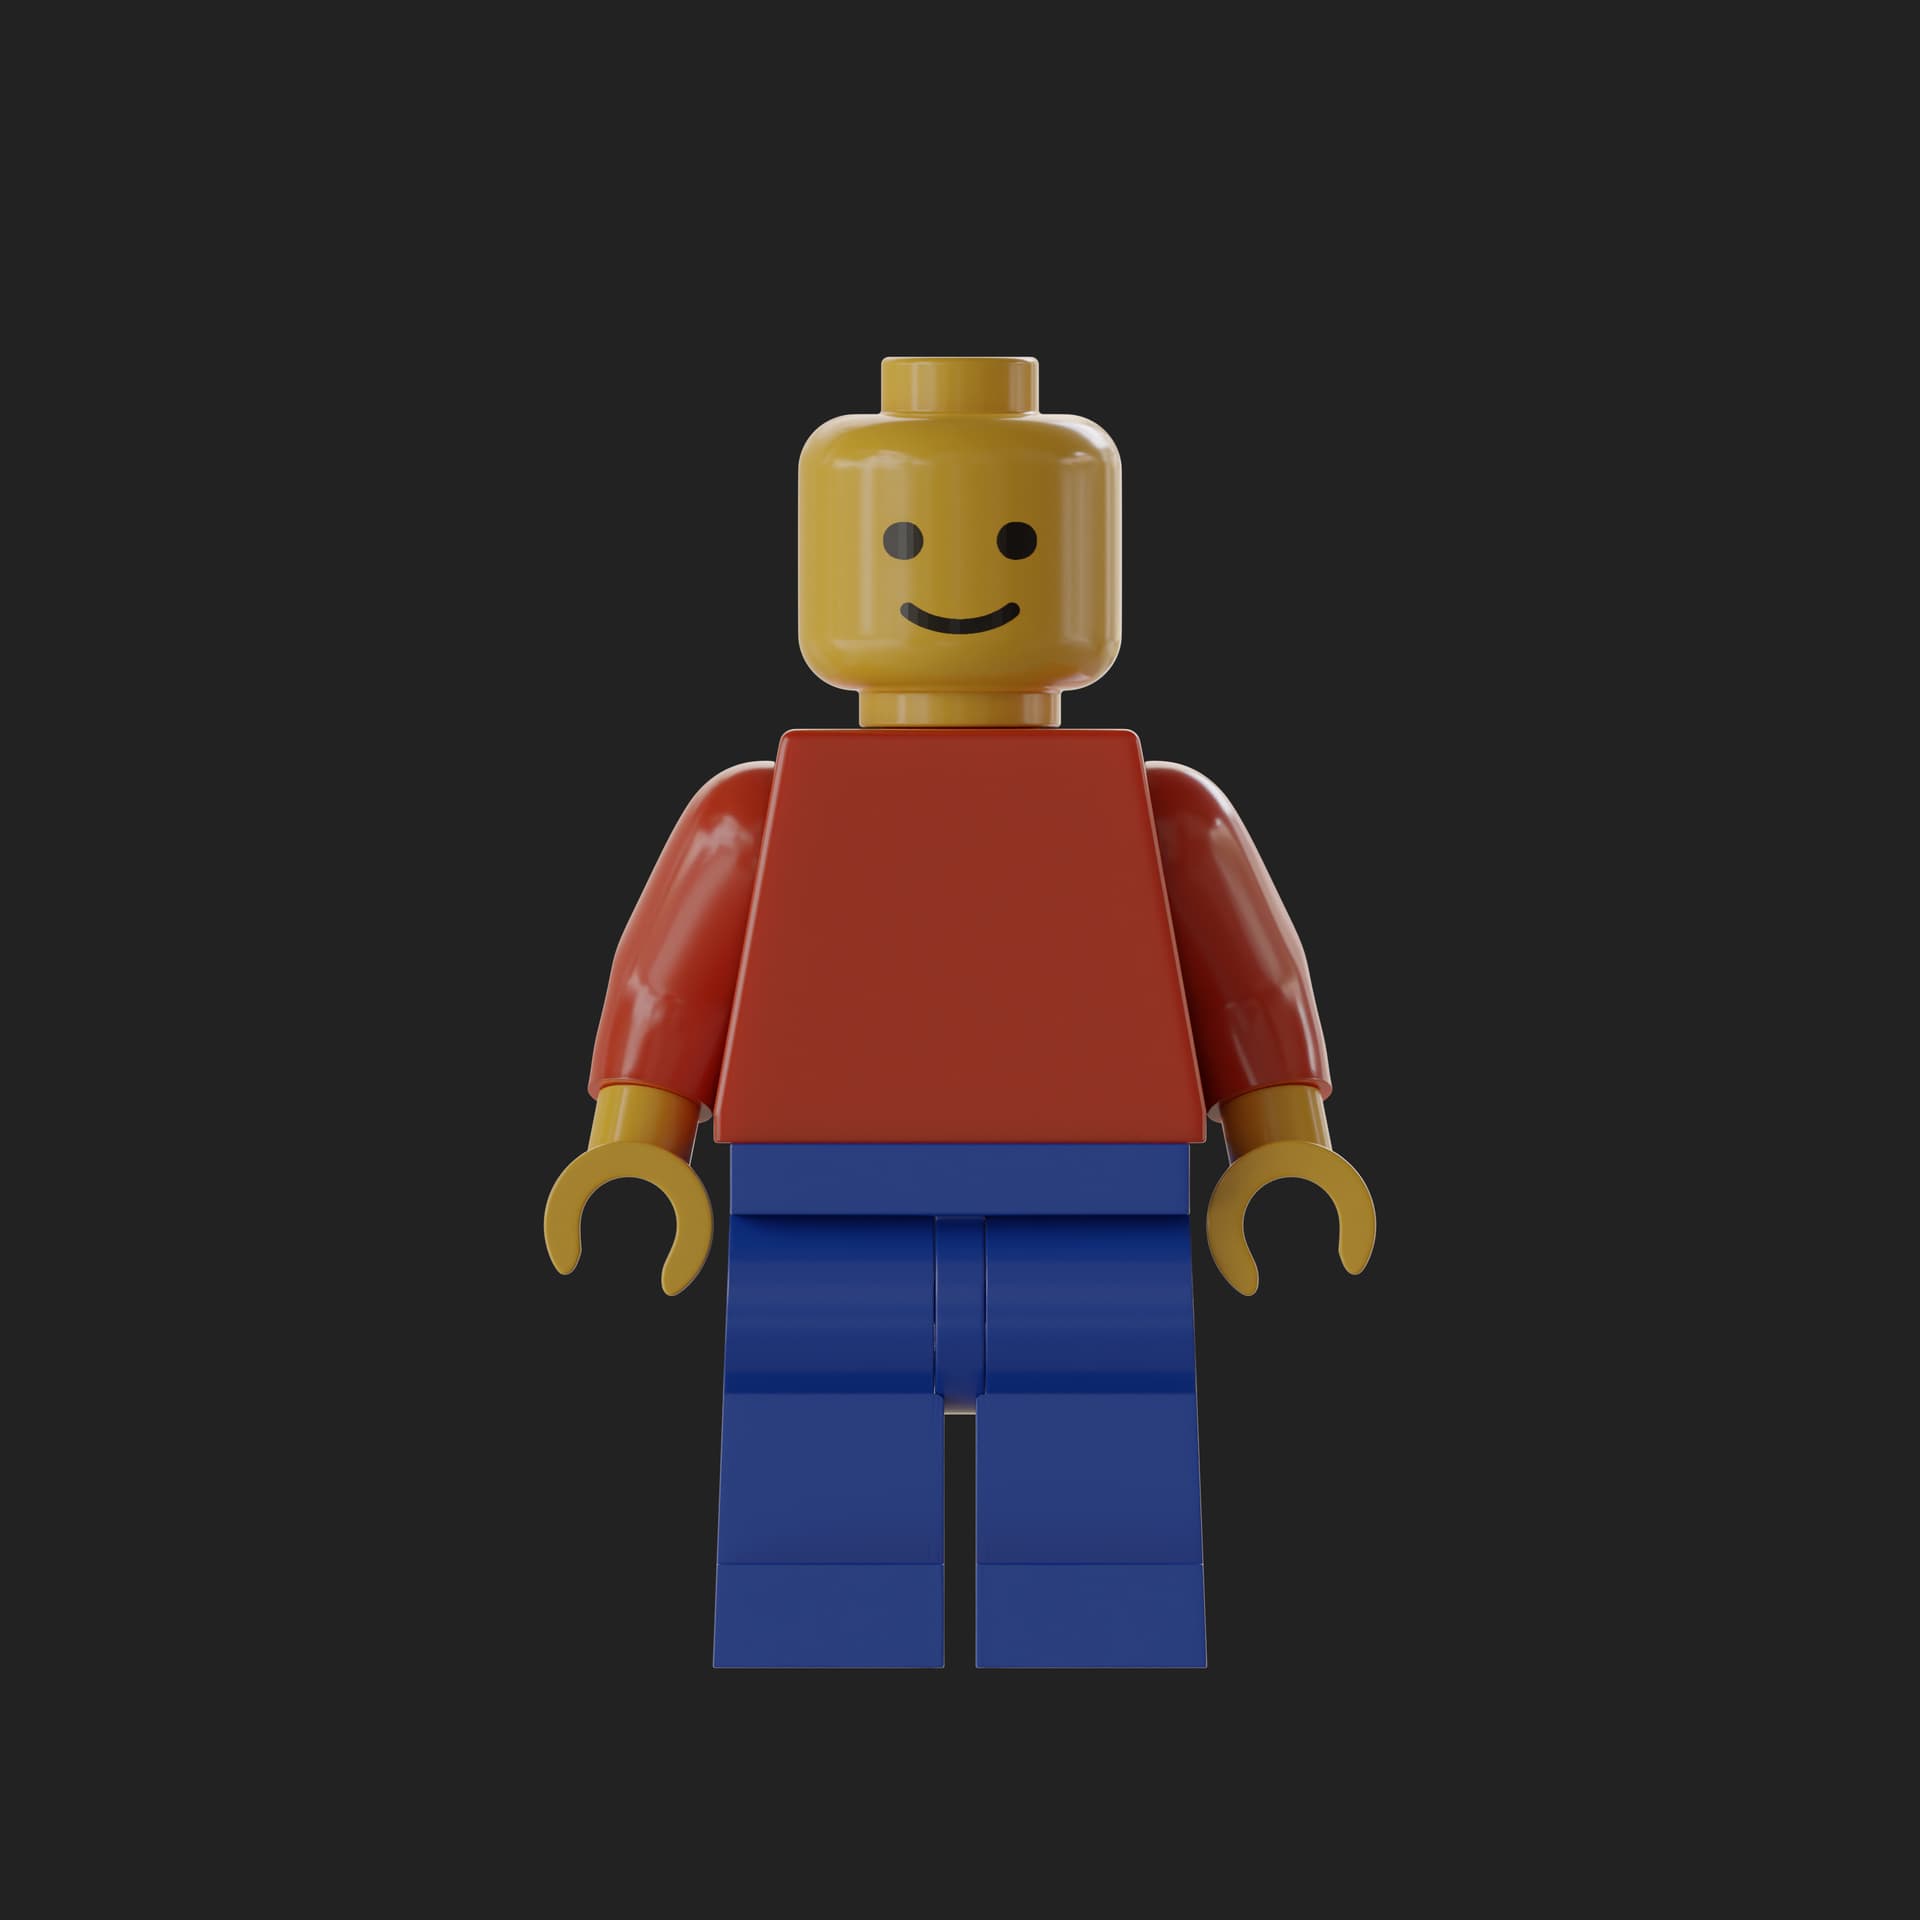 Classic Lego Figure - Finished Projects - Blender Artists Community